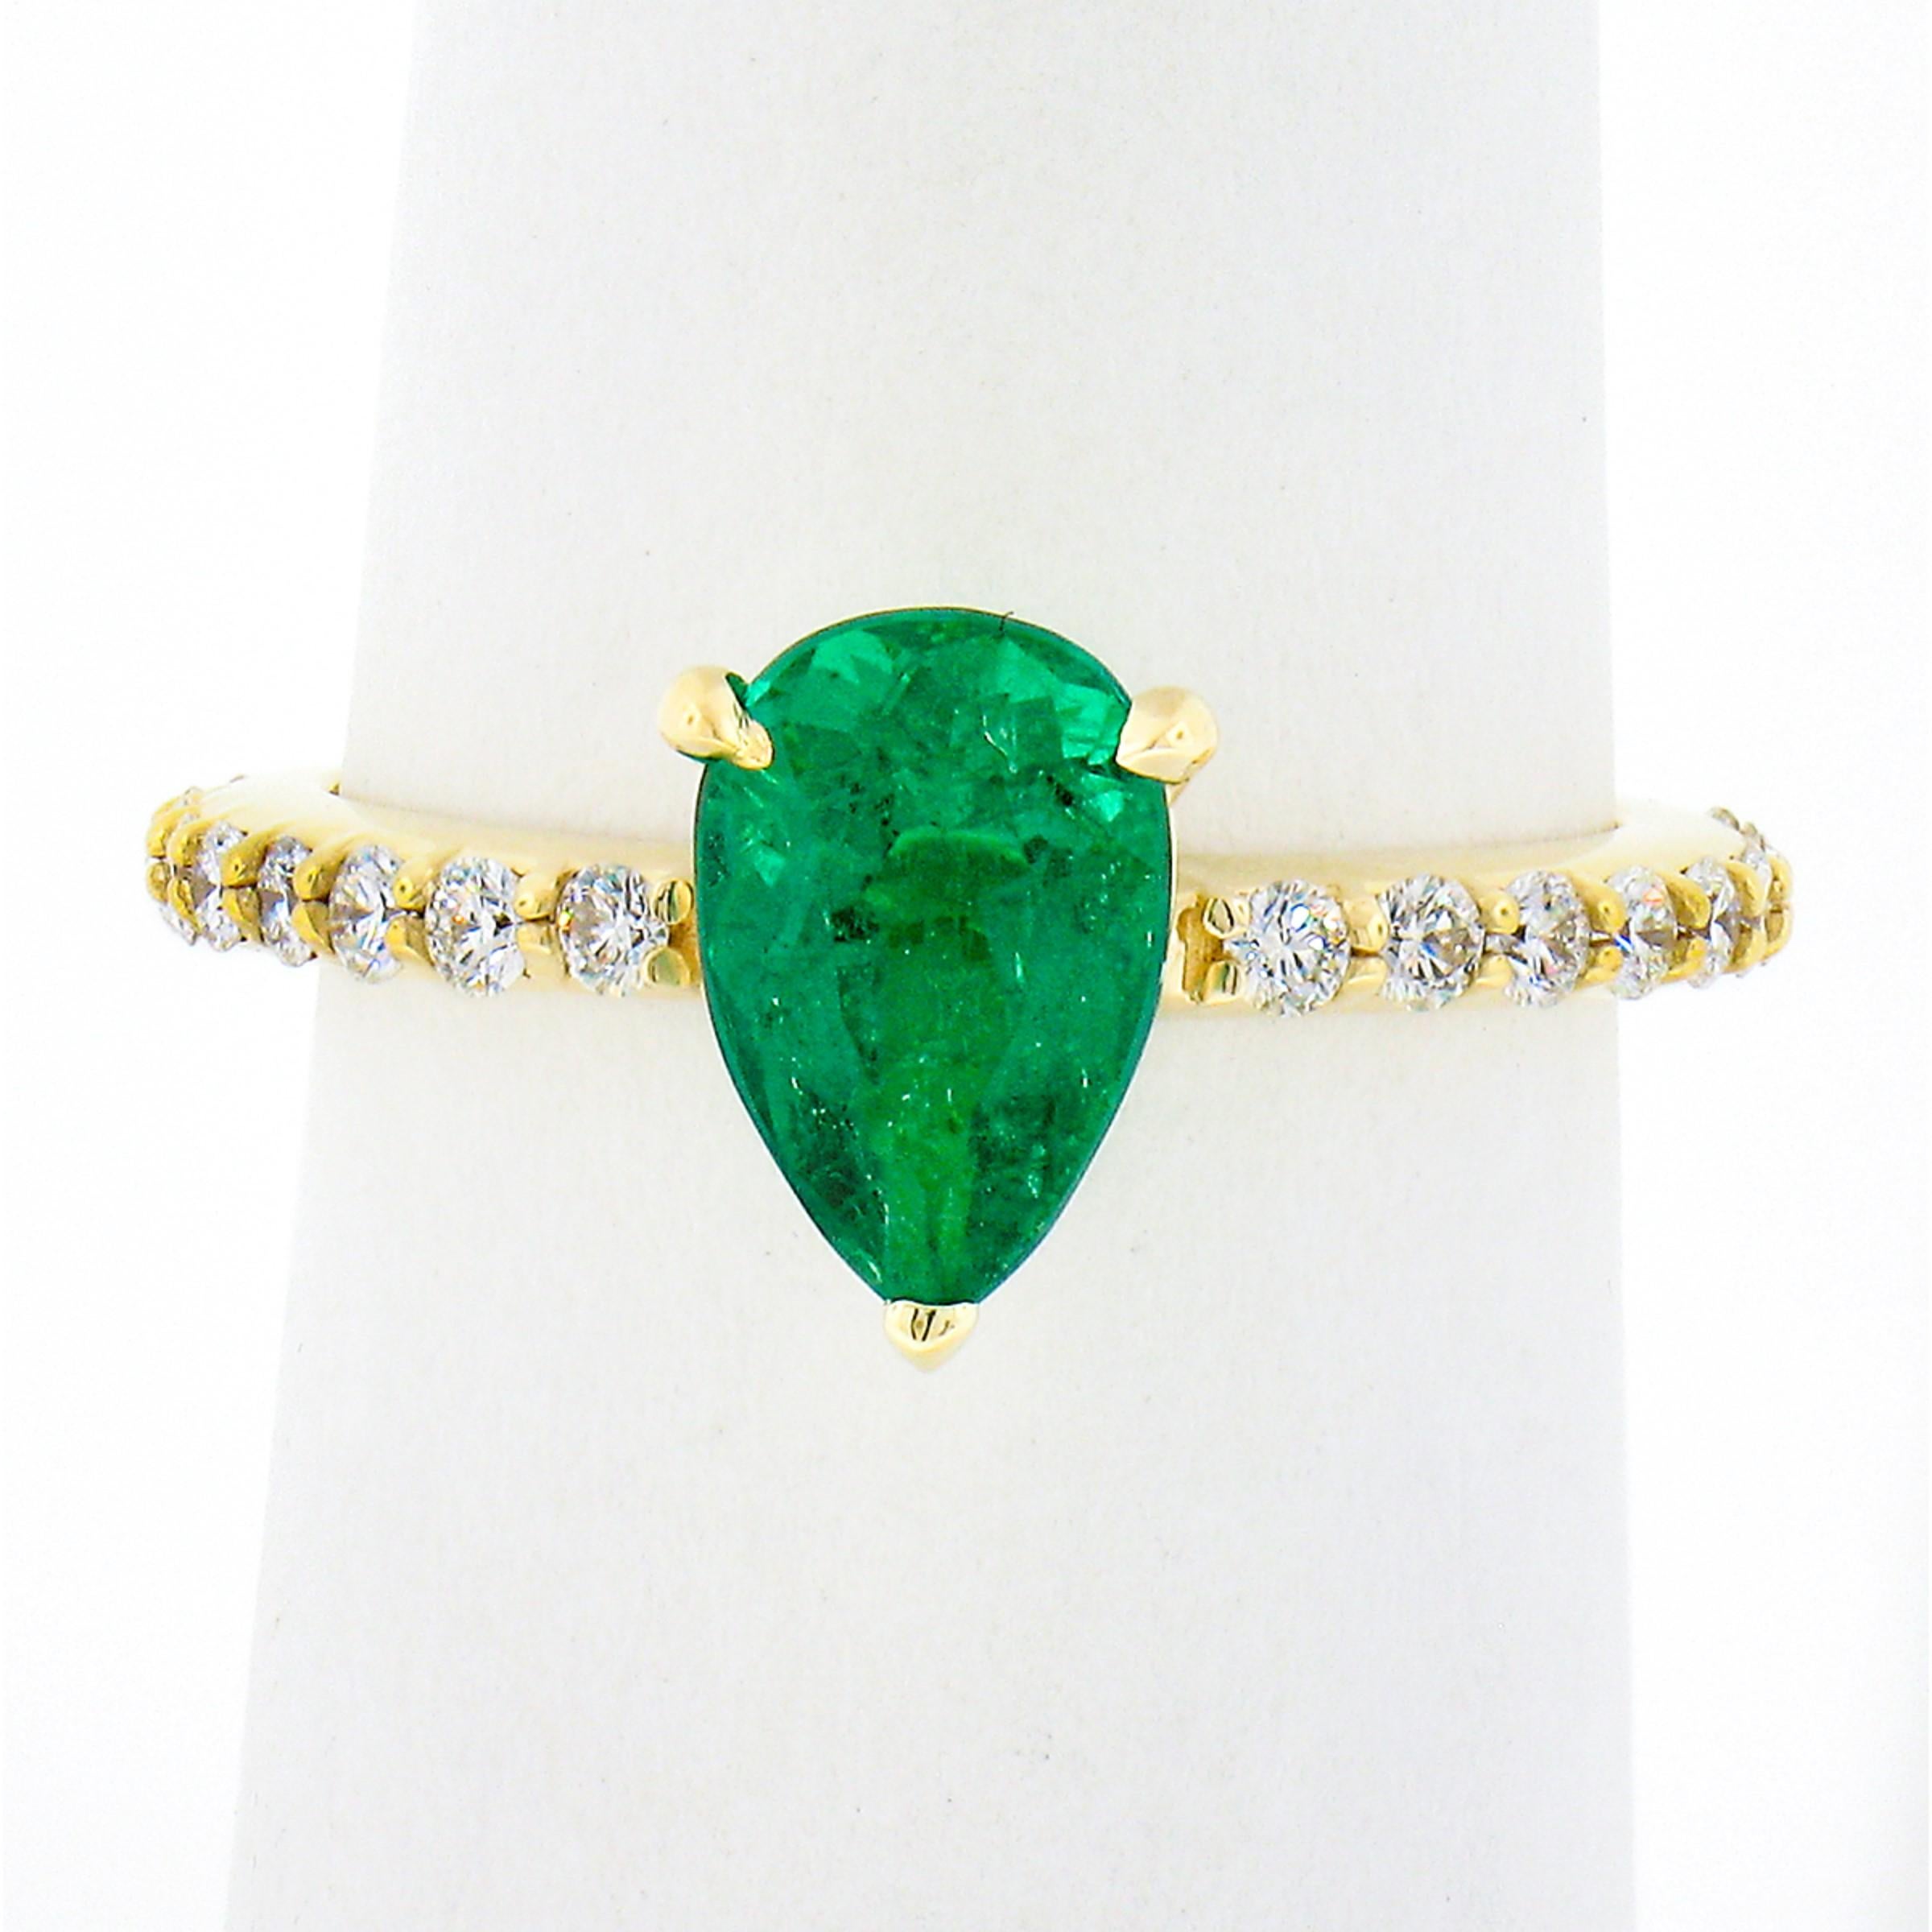 This stunning, SSEF certified, emerald and diamond engagement ring is newly crafted in solid 18k yellow gold. The ring features a breathtaking, natural, pear cut emerald stone that displays the finest and most desirable vivid green color. This very